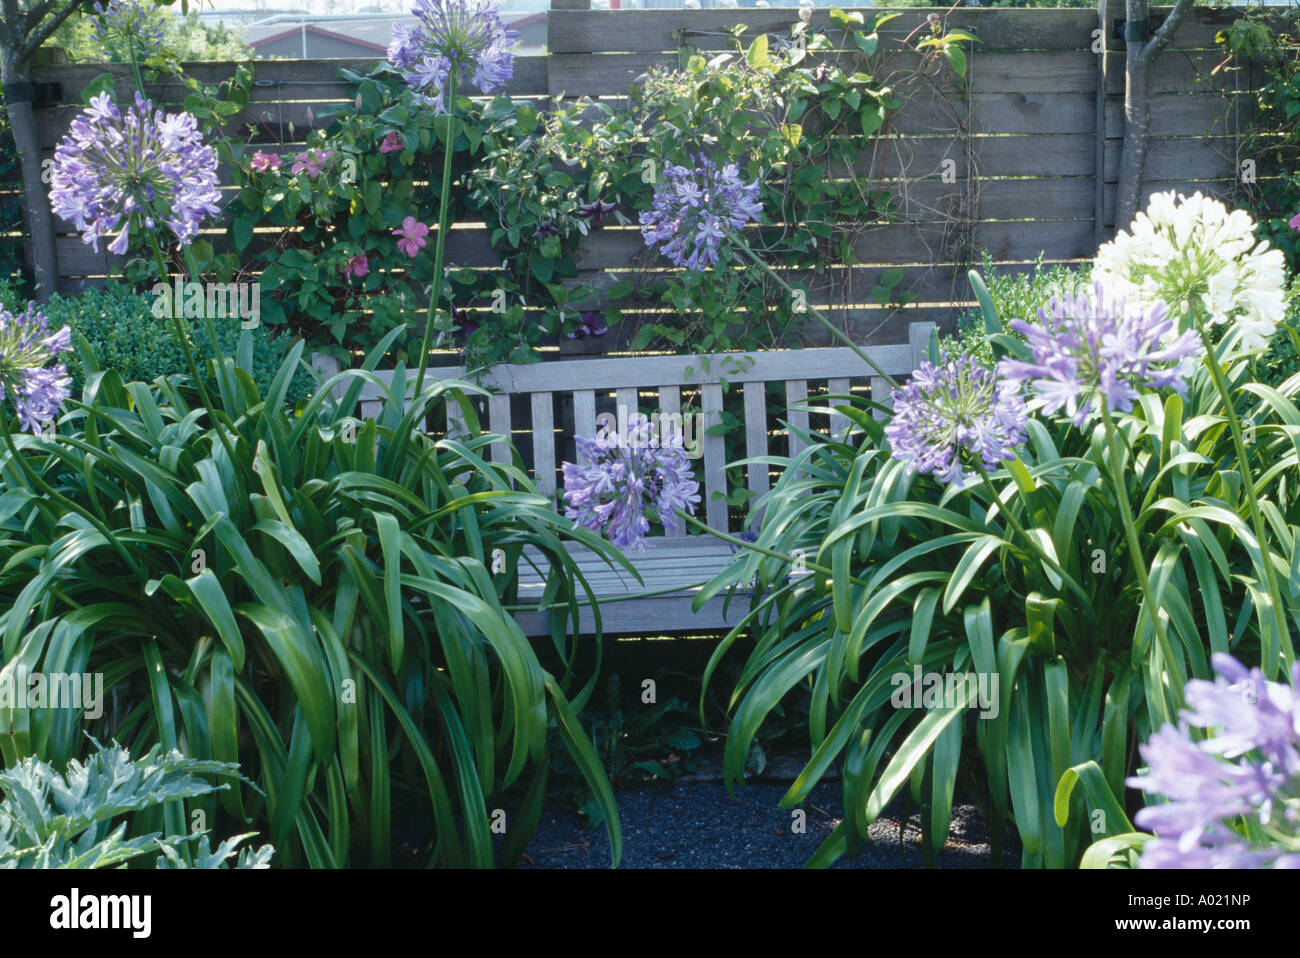 White and blue agapanthus in pots beside wooden garden bench Stock Photo